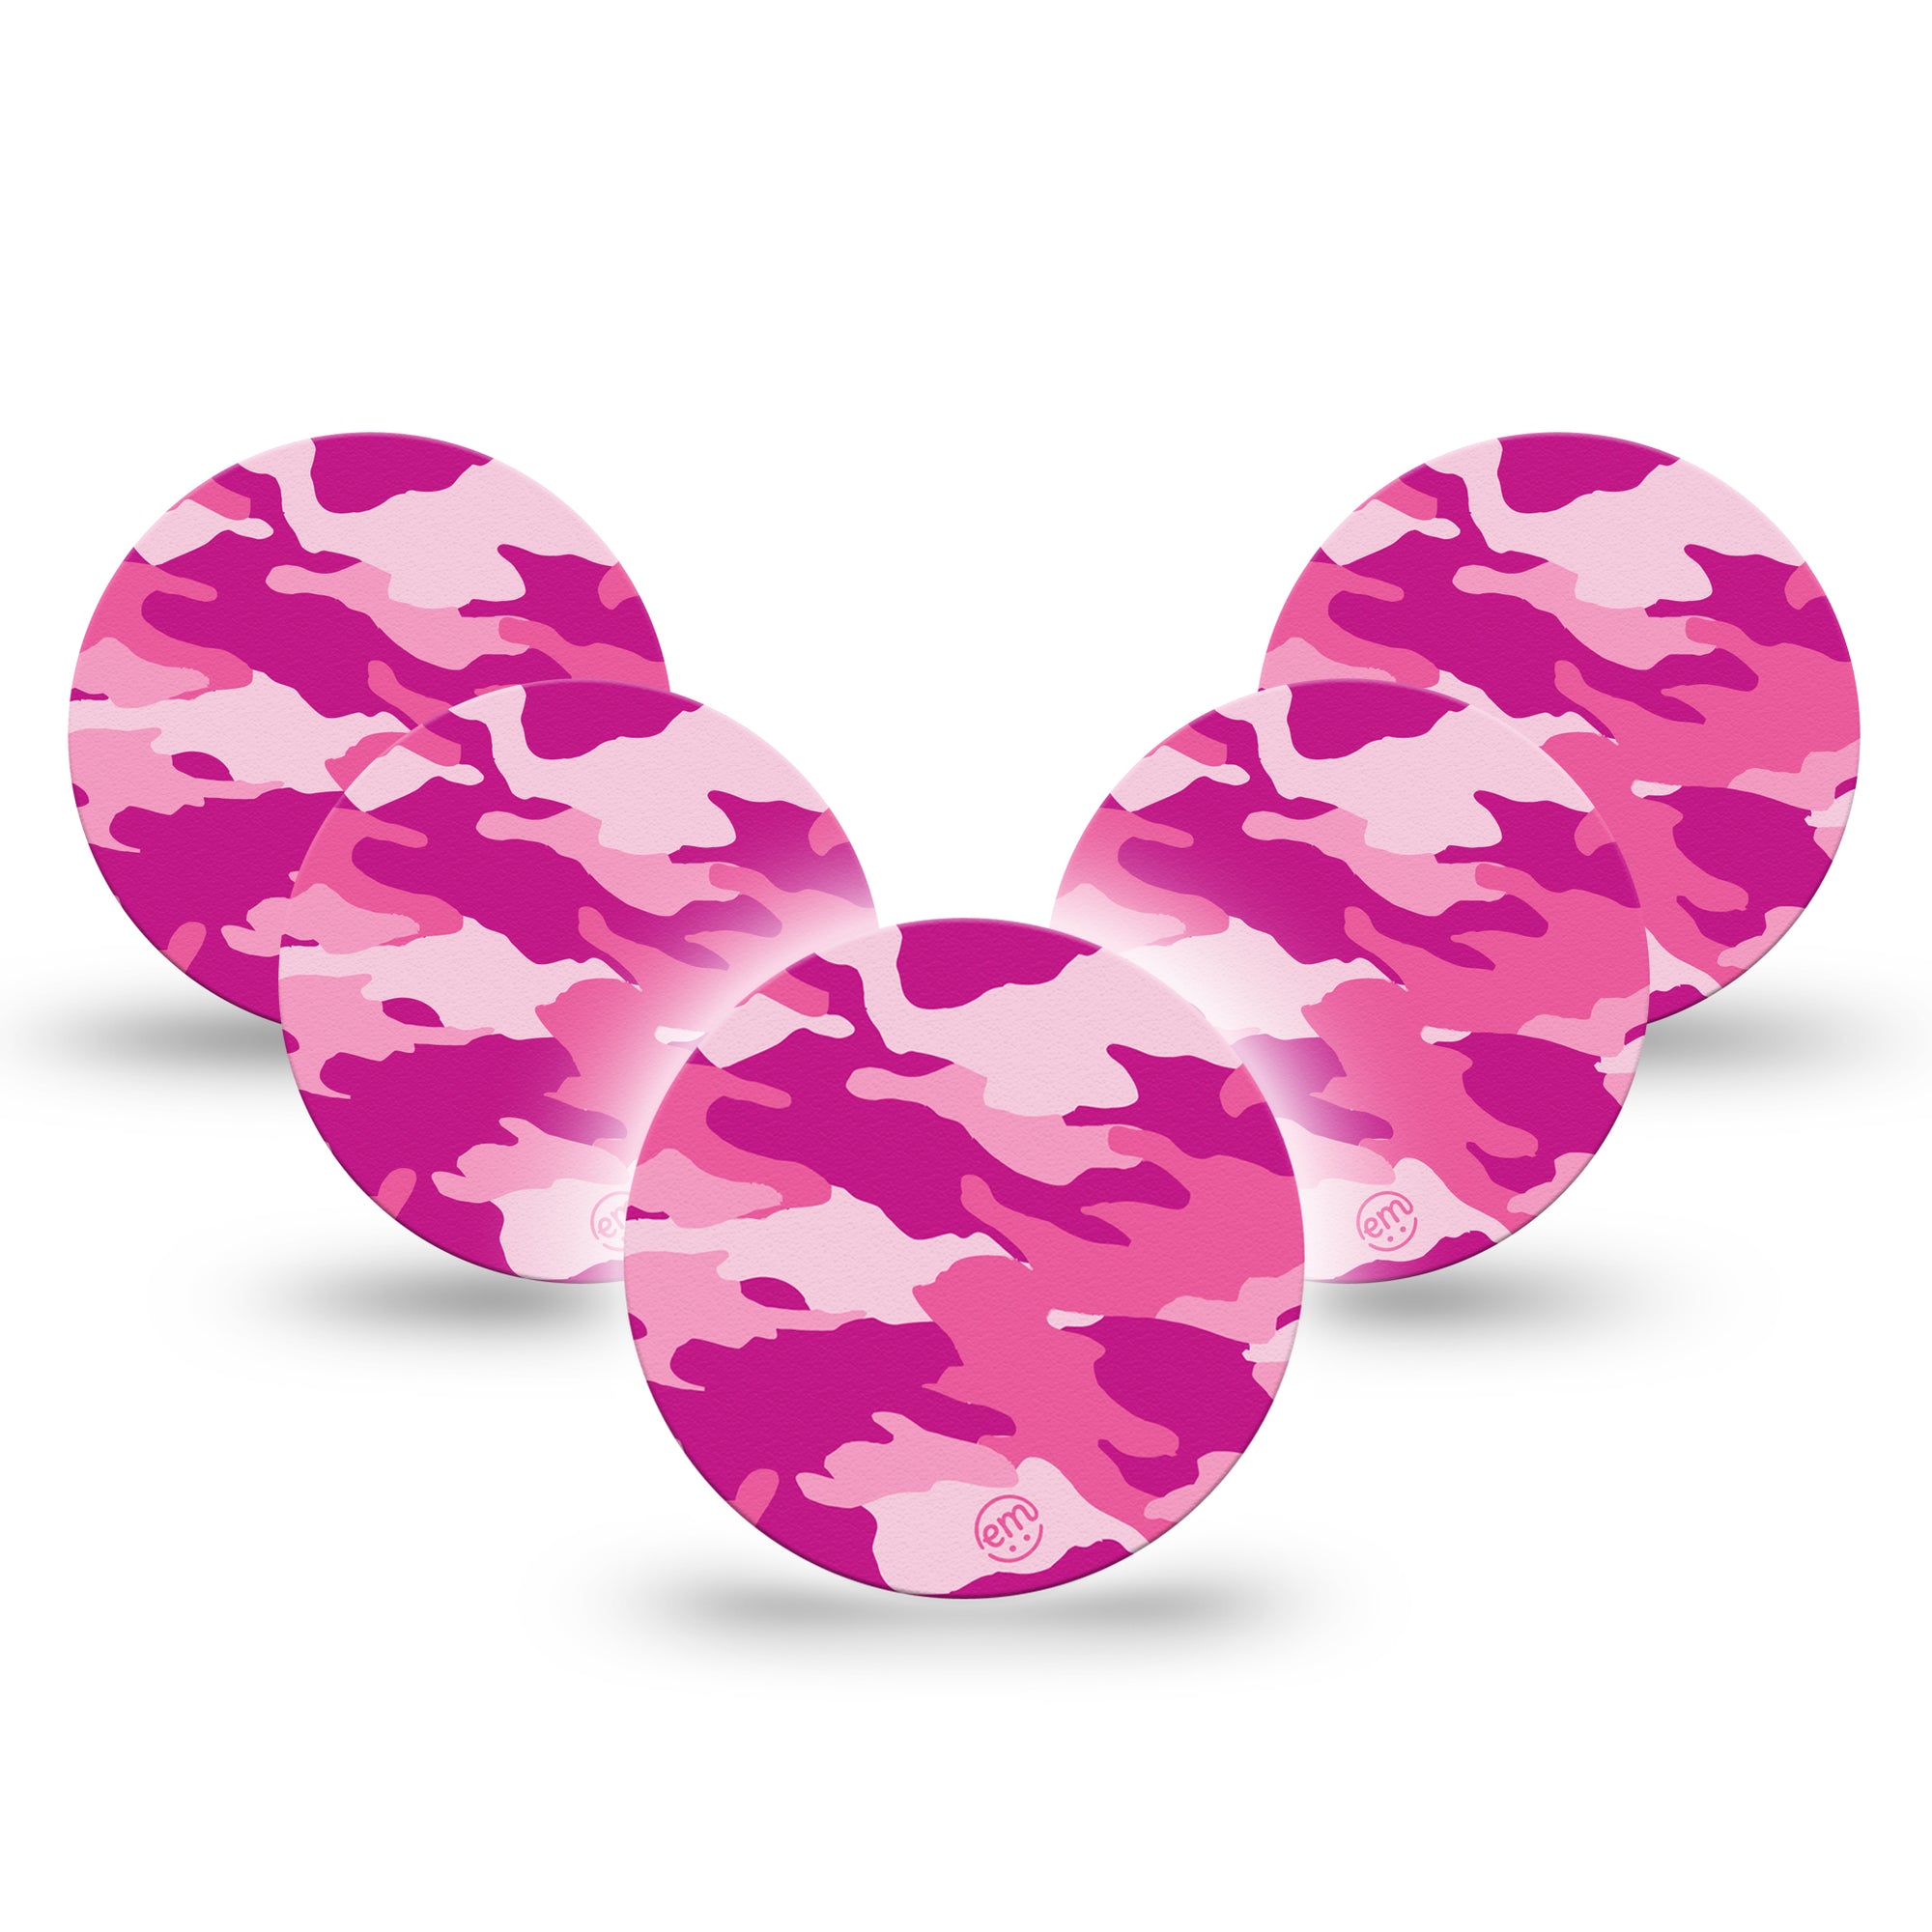 ExpressionMed Pink Camo Libre 3 Overpatch, 5-Pack, Pink Concealment Inspired, CGM Overlay Tape Design